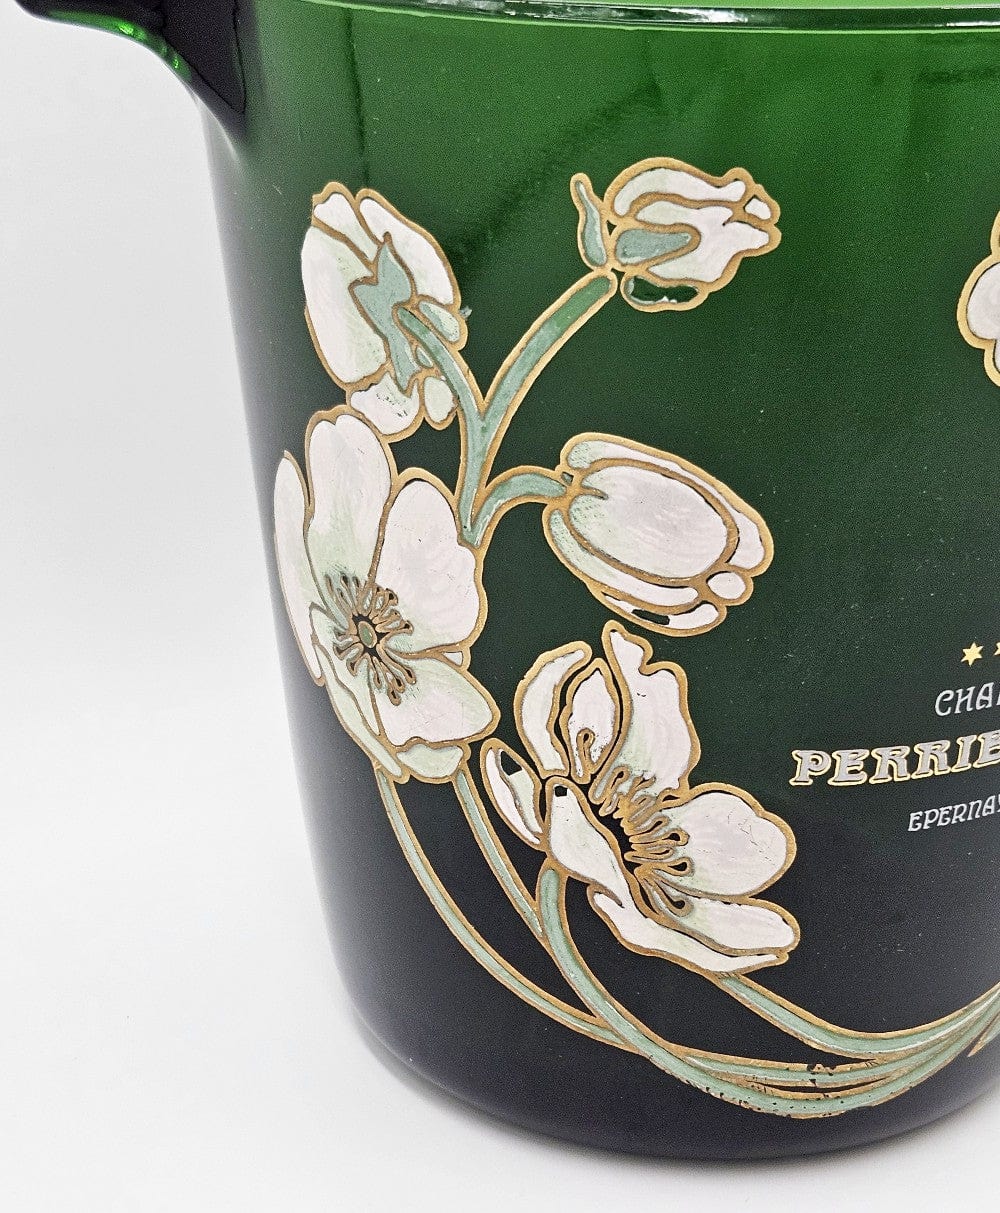 Perrier Jouet France Barware Perrier Jouet France Glass Hand-Painted Champagne Chiller Flute Set 1960s